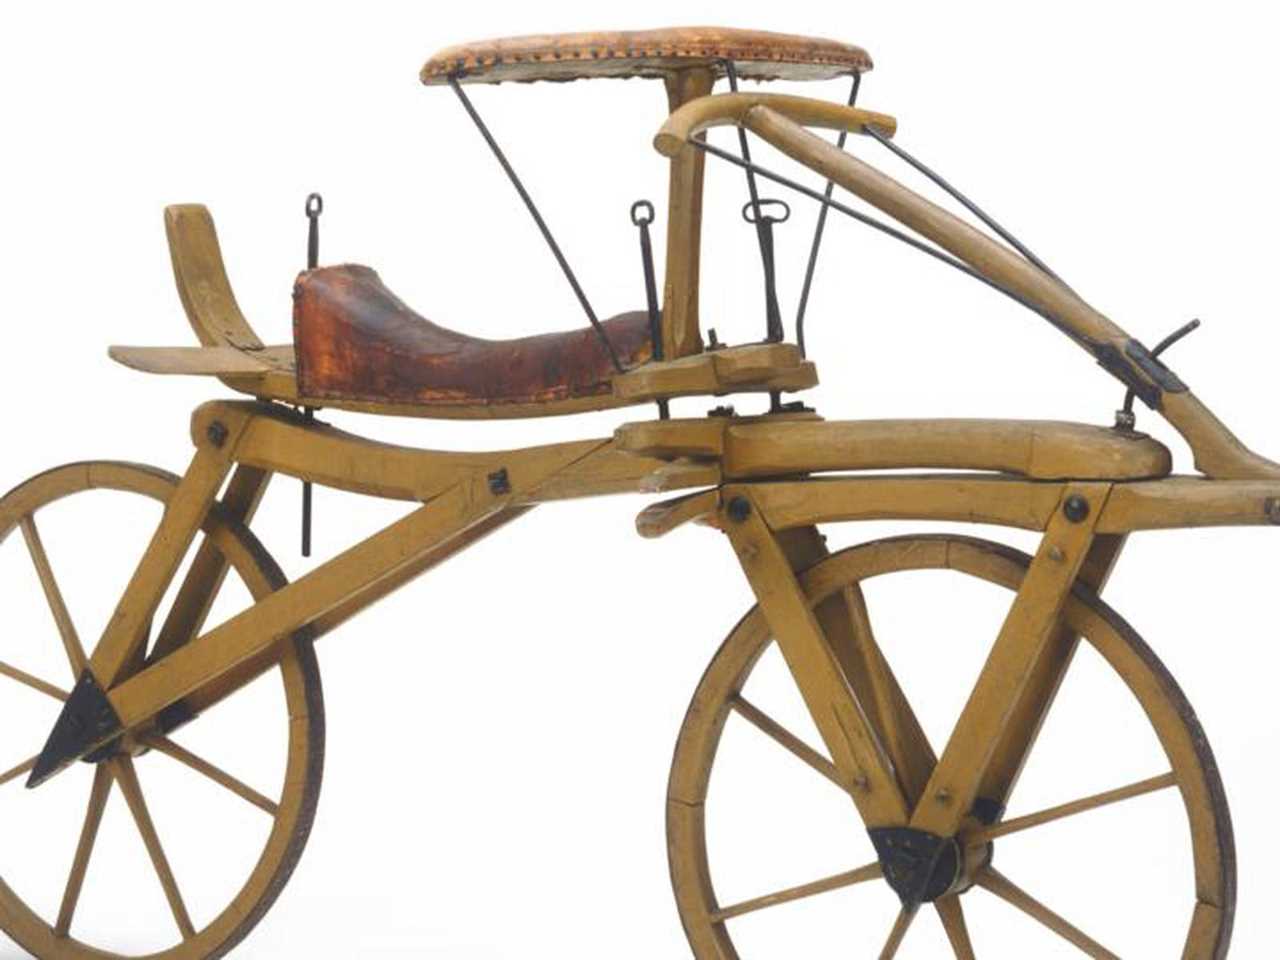 The Invention of the Safety Bicycle